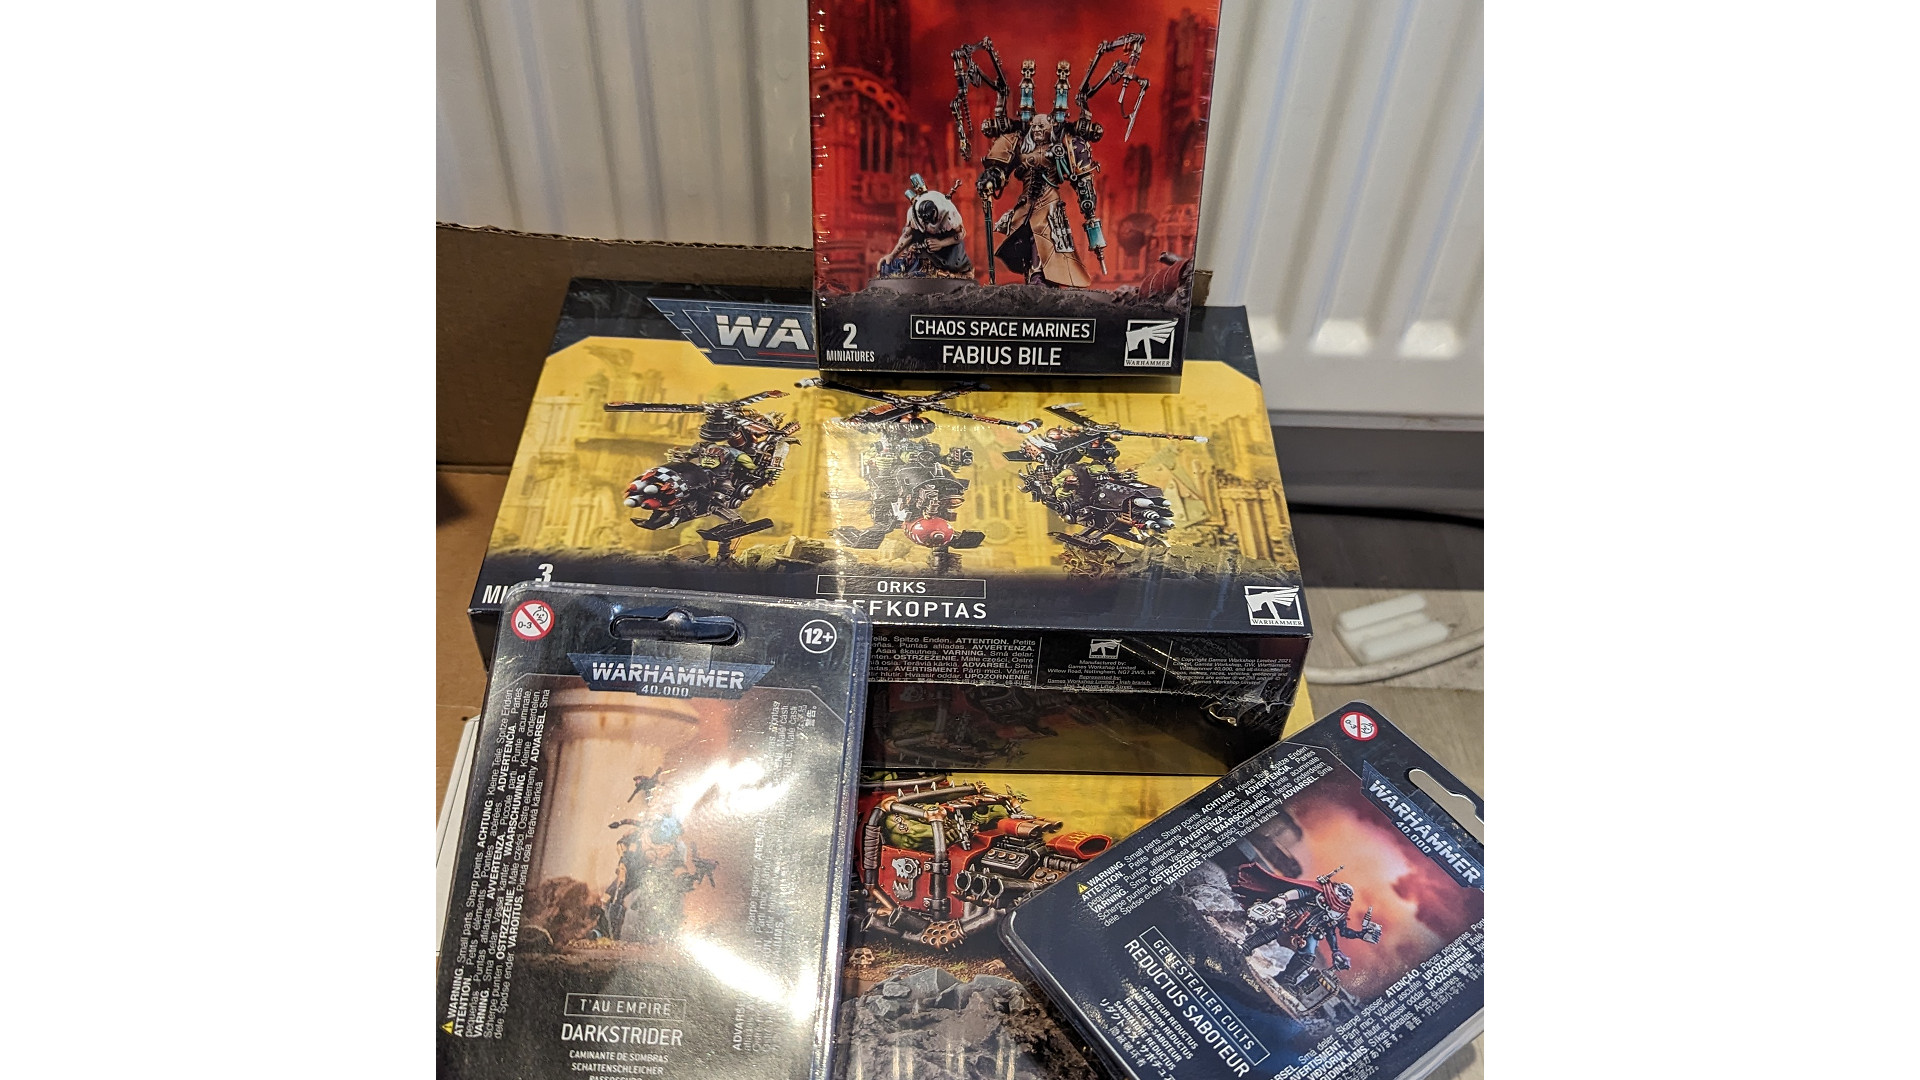 Warhammer 40k loot boxes landing - photograph of a pile of Warhammer 40k product boxes by Redditor wqwcnmamsd 